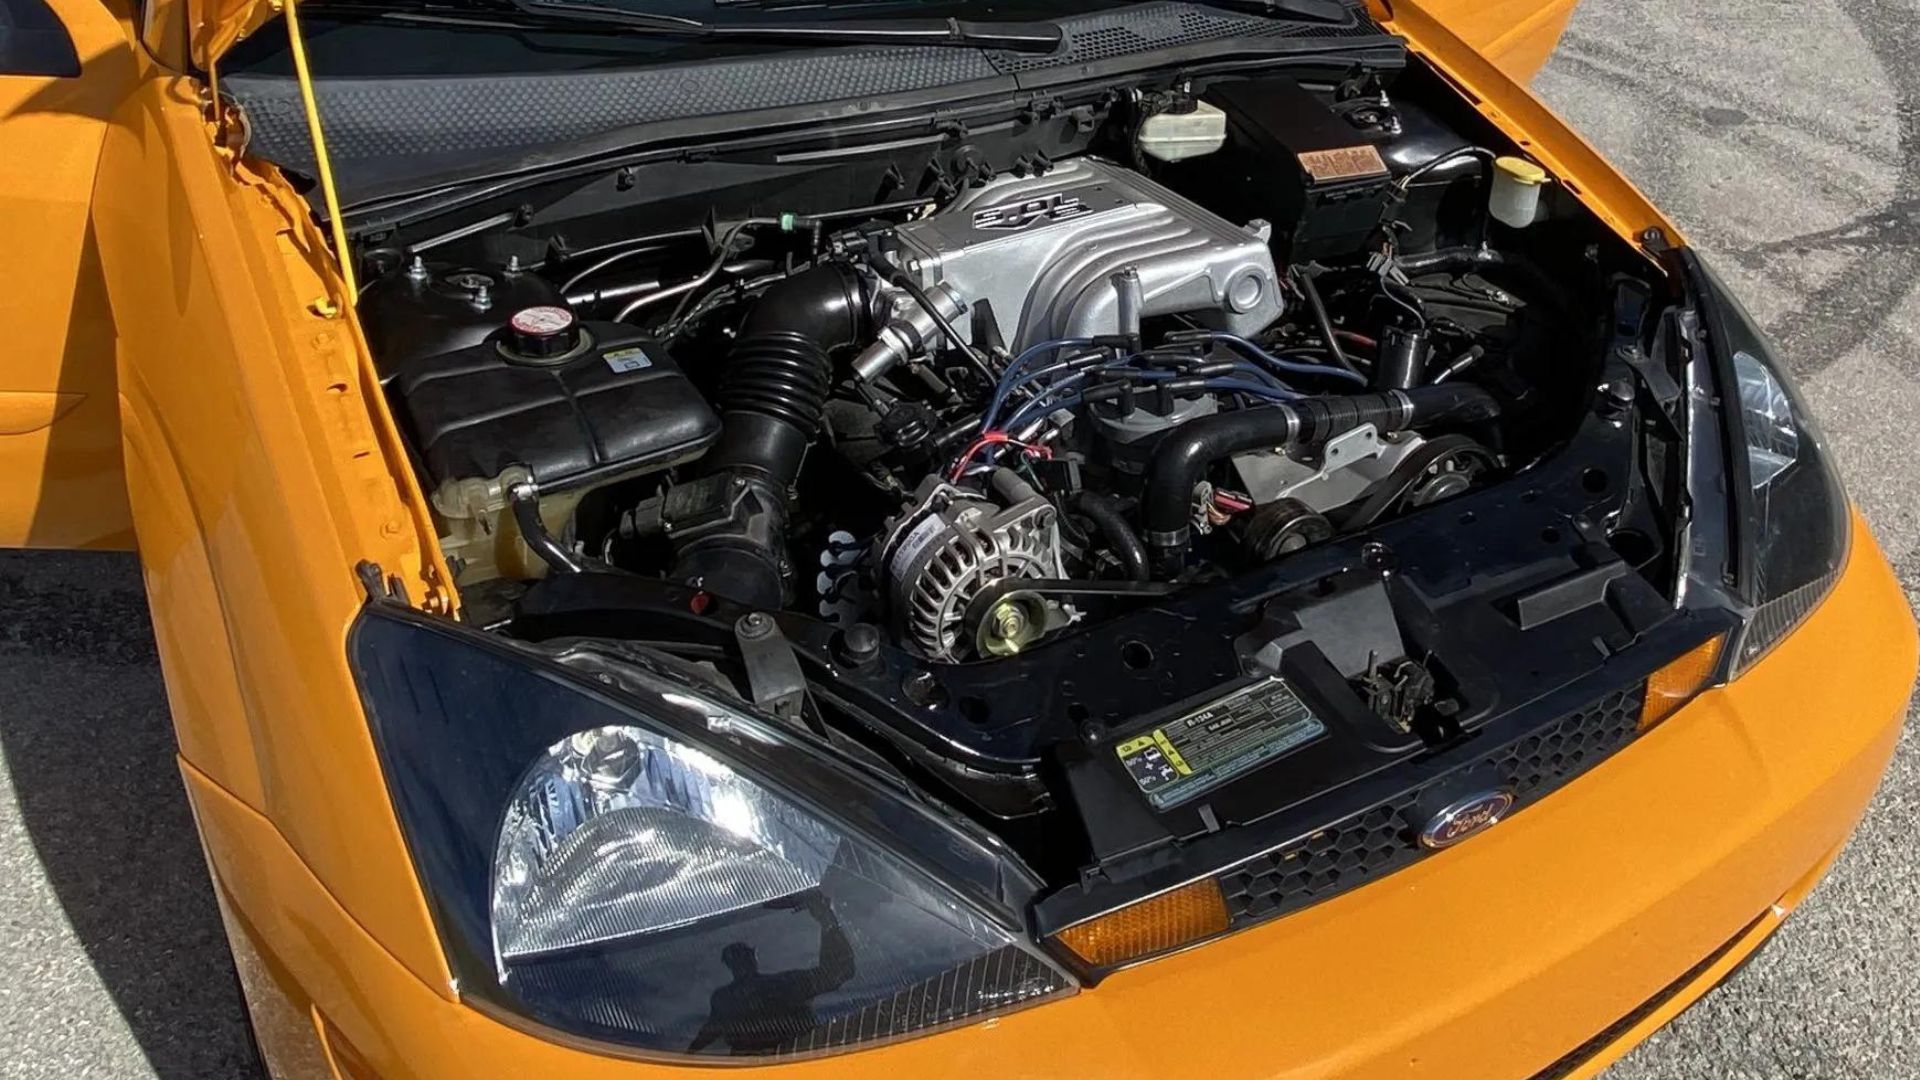 Modified 2003 Ford Focus engine bay view